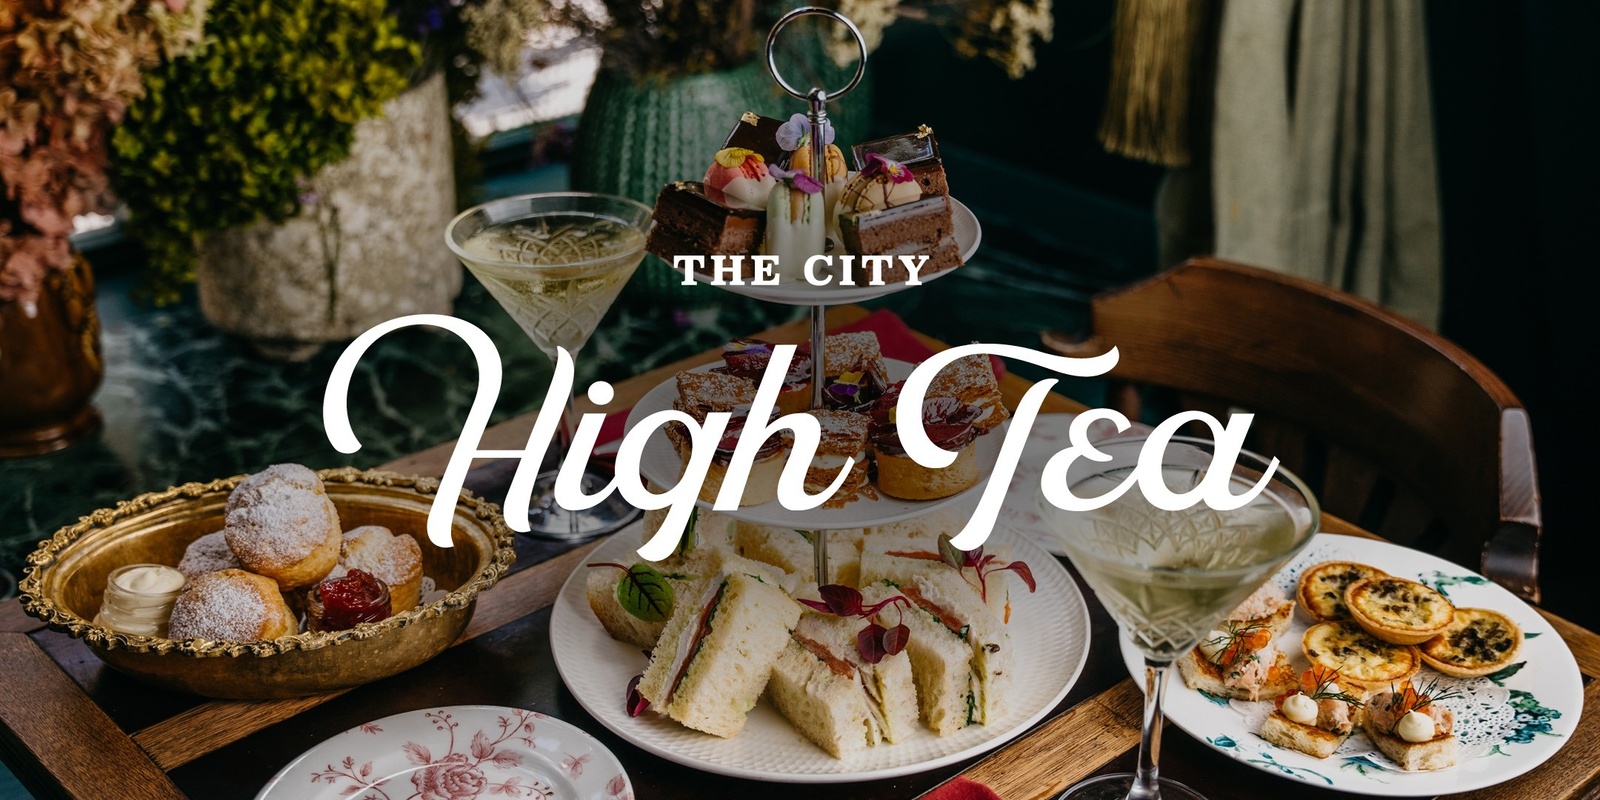 Banner image for City High Tea | The Grounds of the City